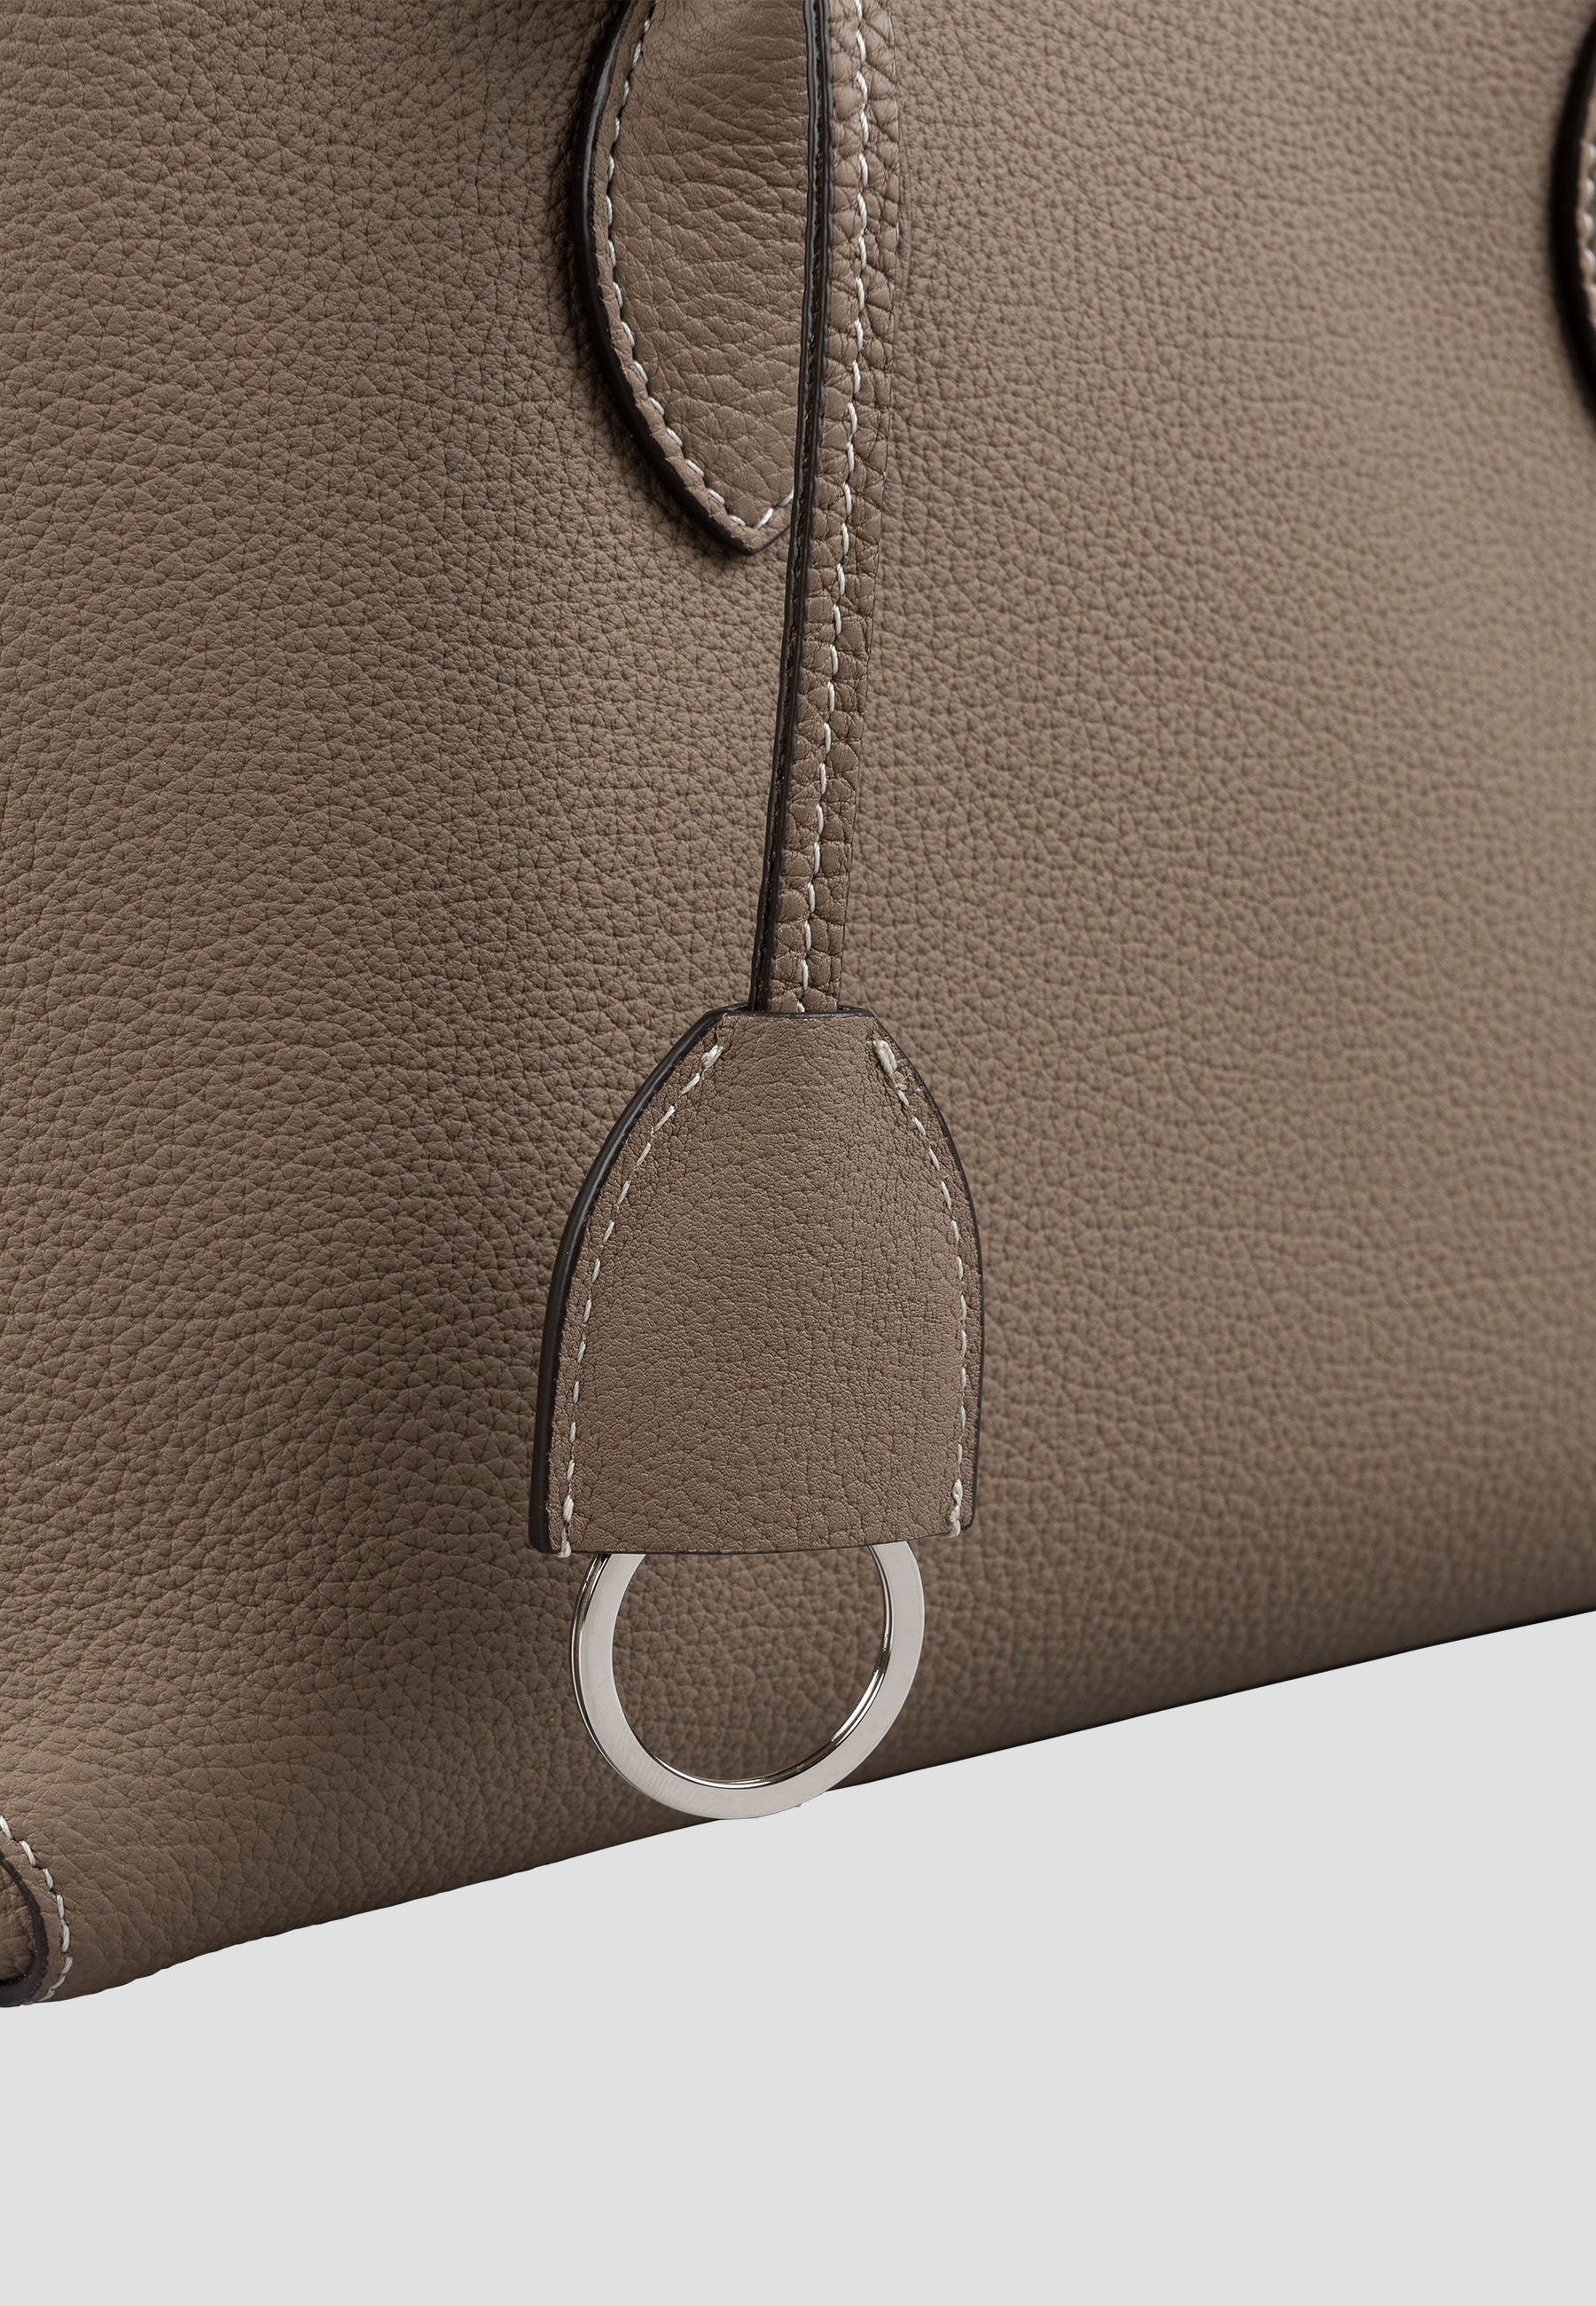 Close-up detail of the natural grain and texture of high-quality full grain leather.